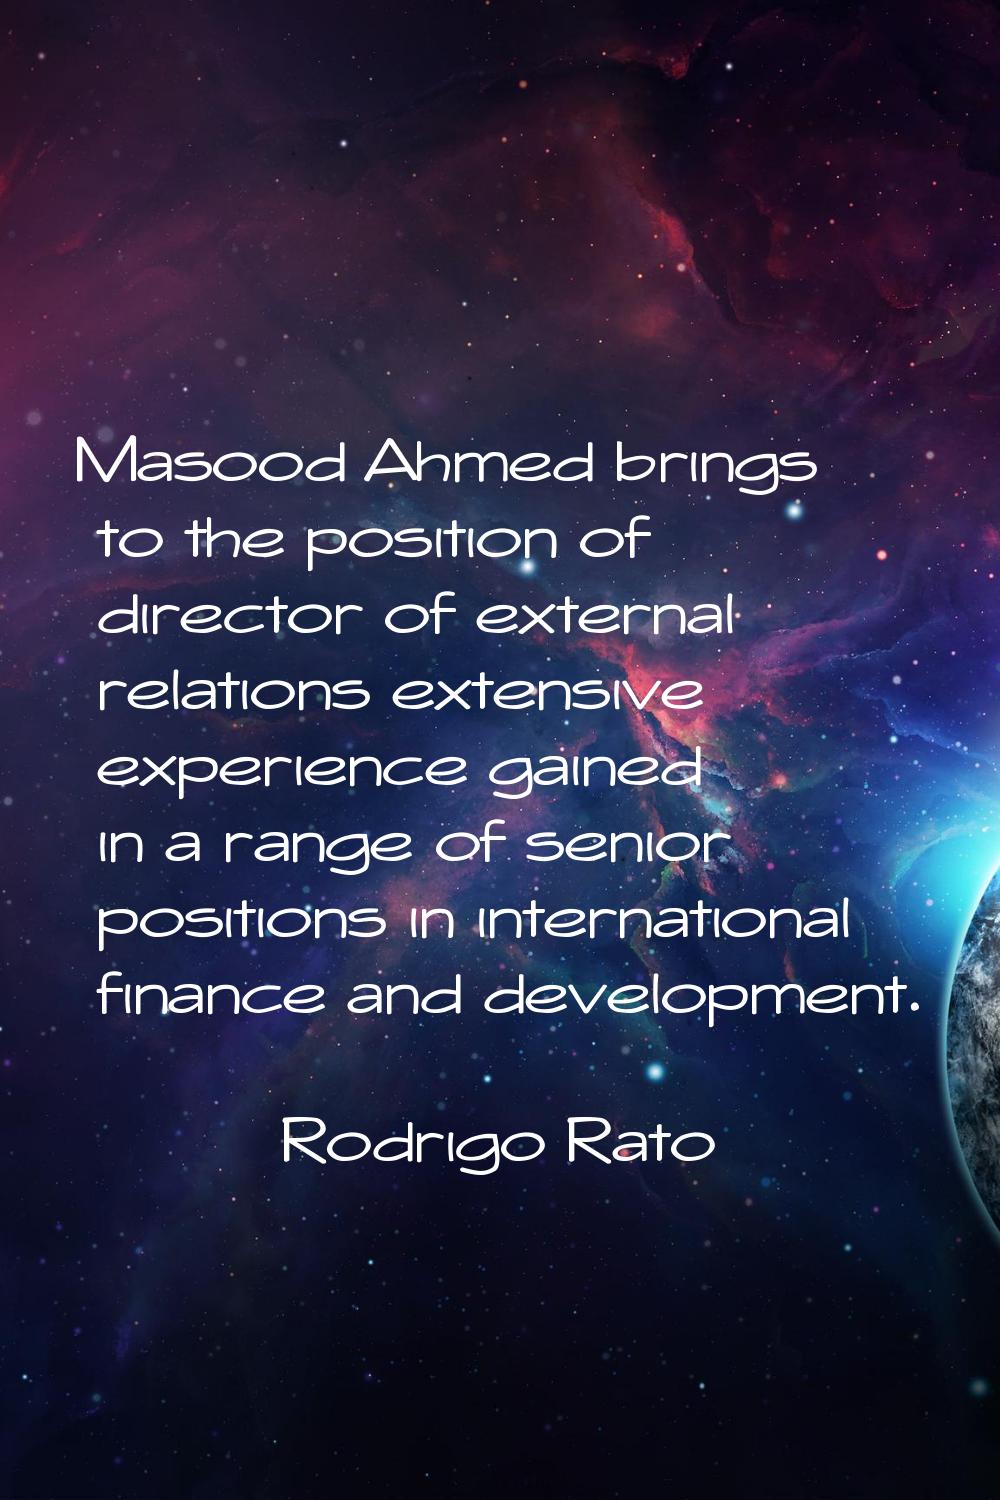 Masood Ahmed brings to the position of director of external relations extensive experience gained i